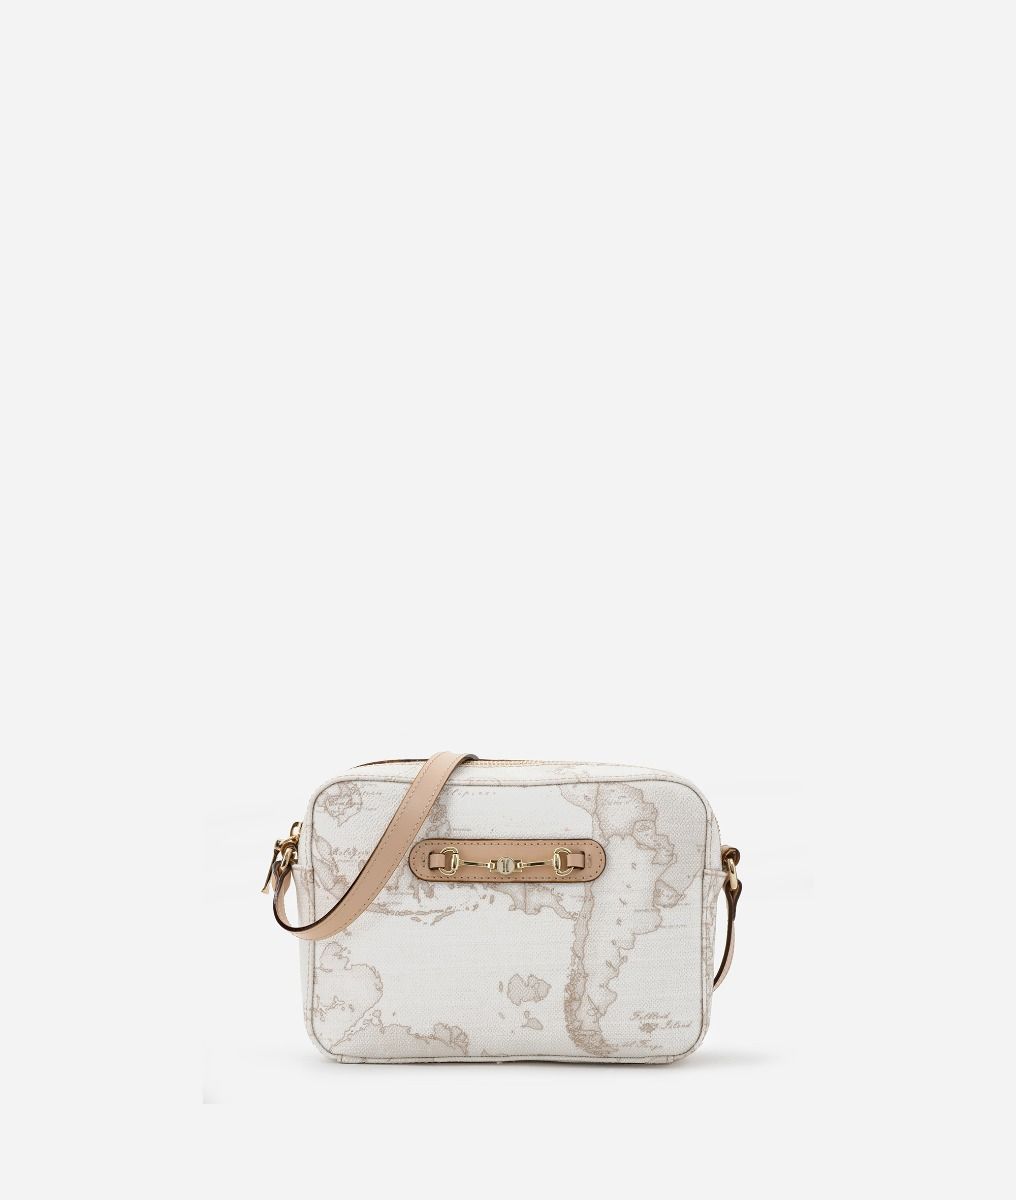 Geo White small reporter bag,front